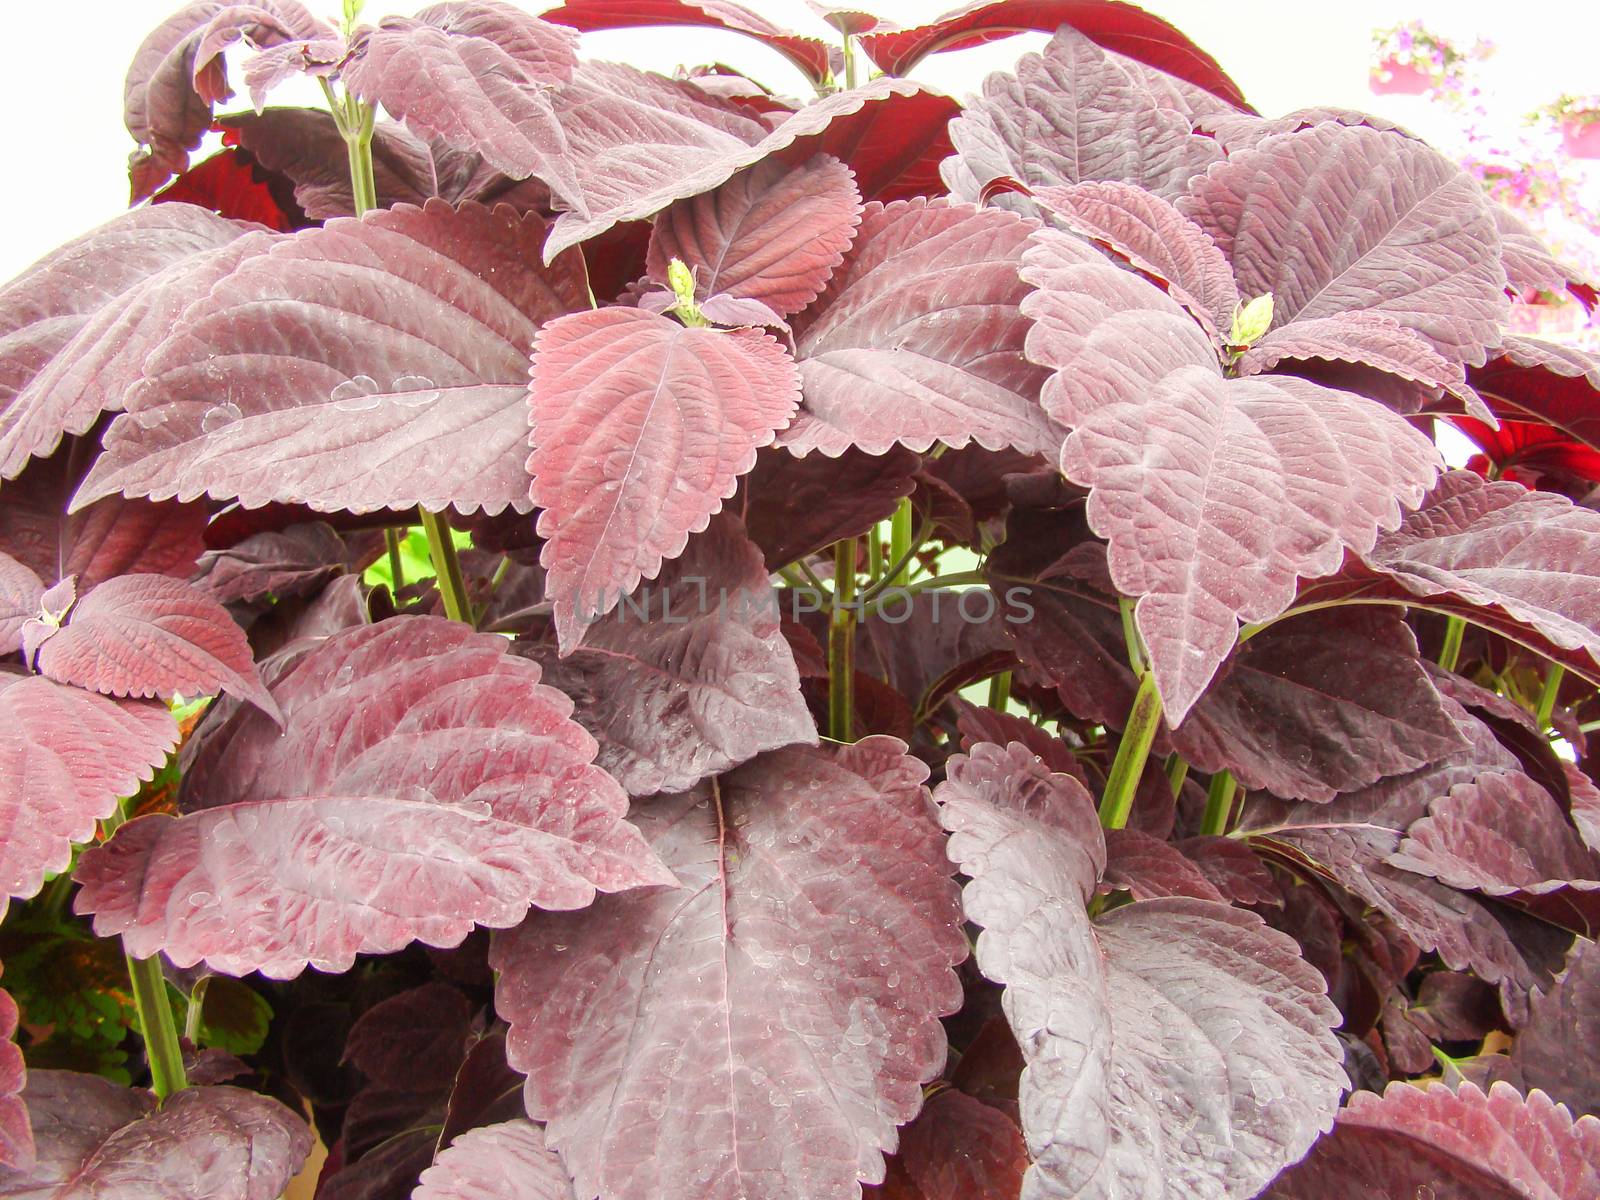 Red purple leaves of the coleus, Plectranthus scutellarioides by yuiyuize